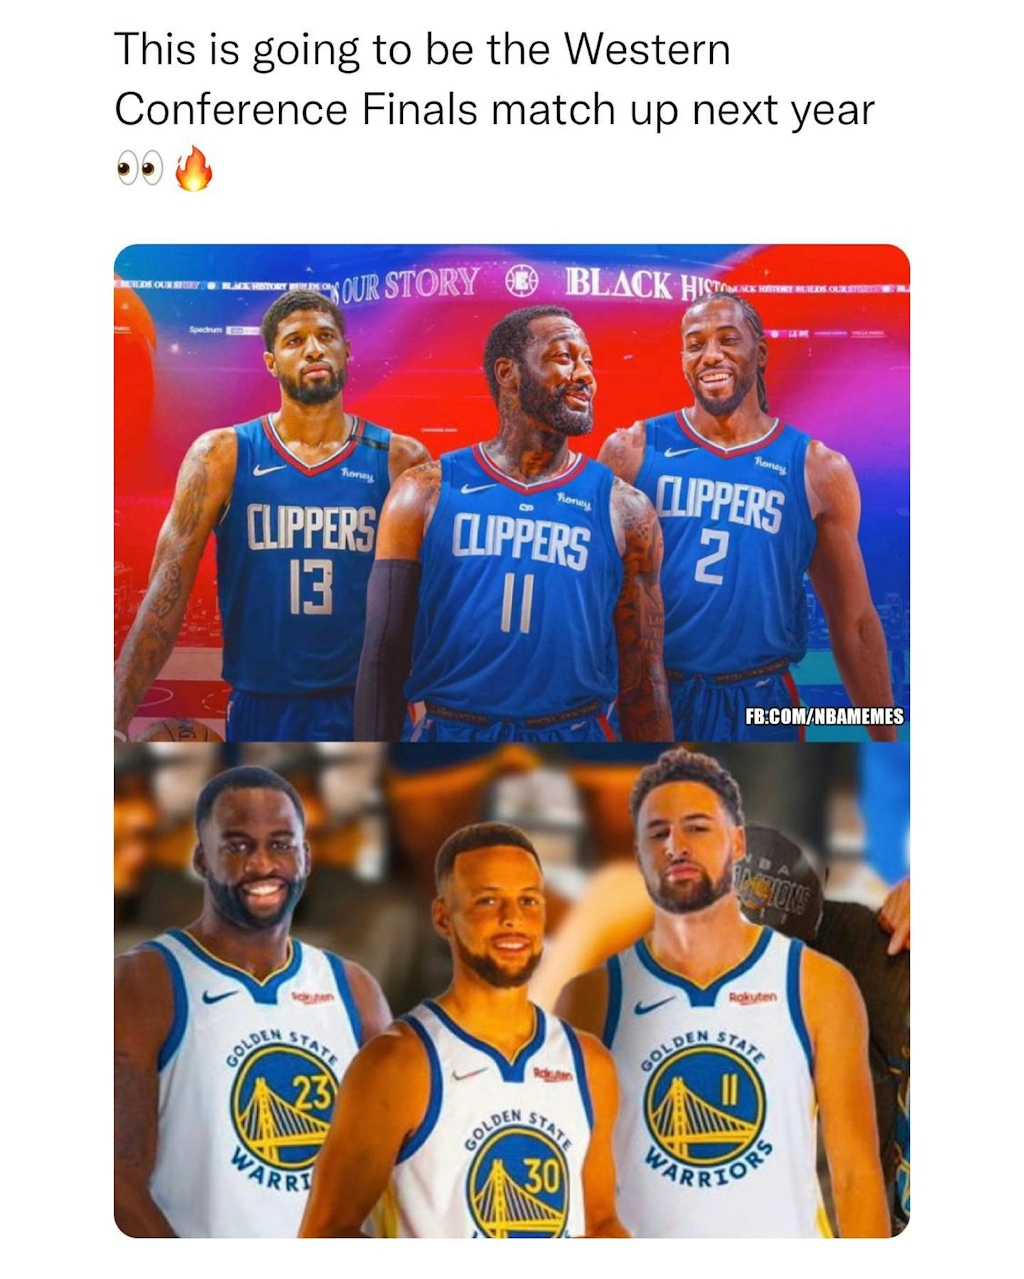 I can see this happening 👀 #clippers #warriors #stephcurry